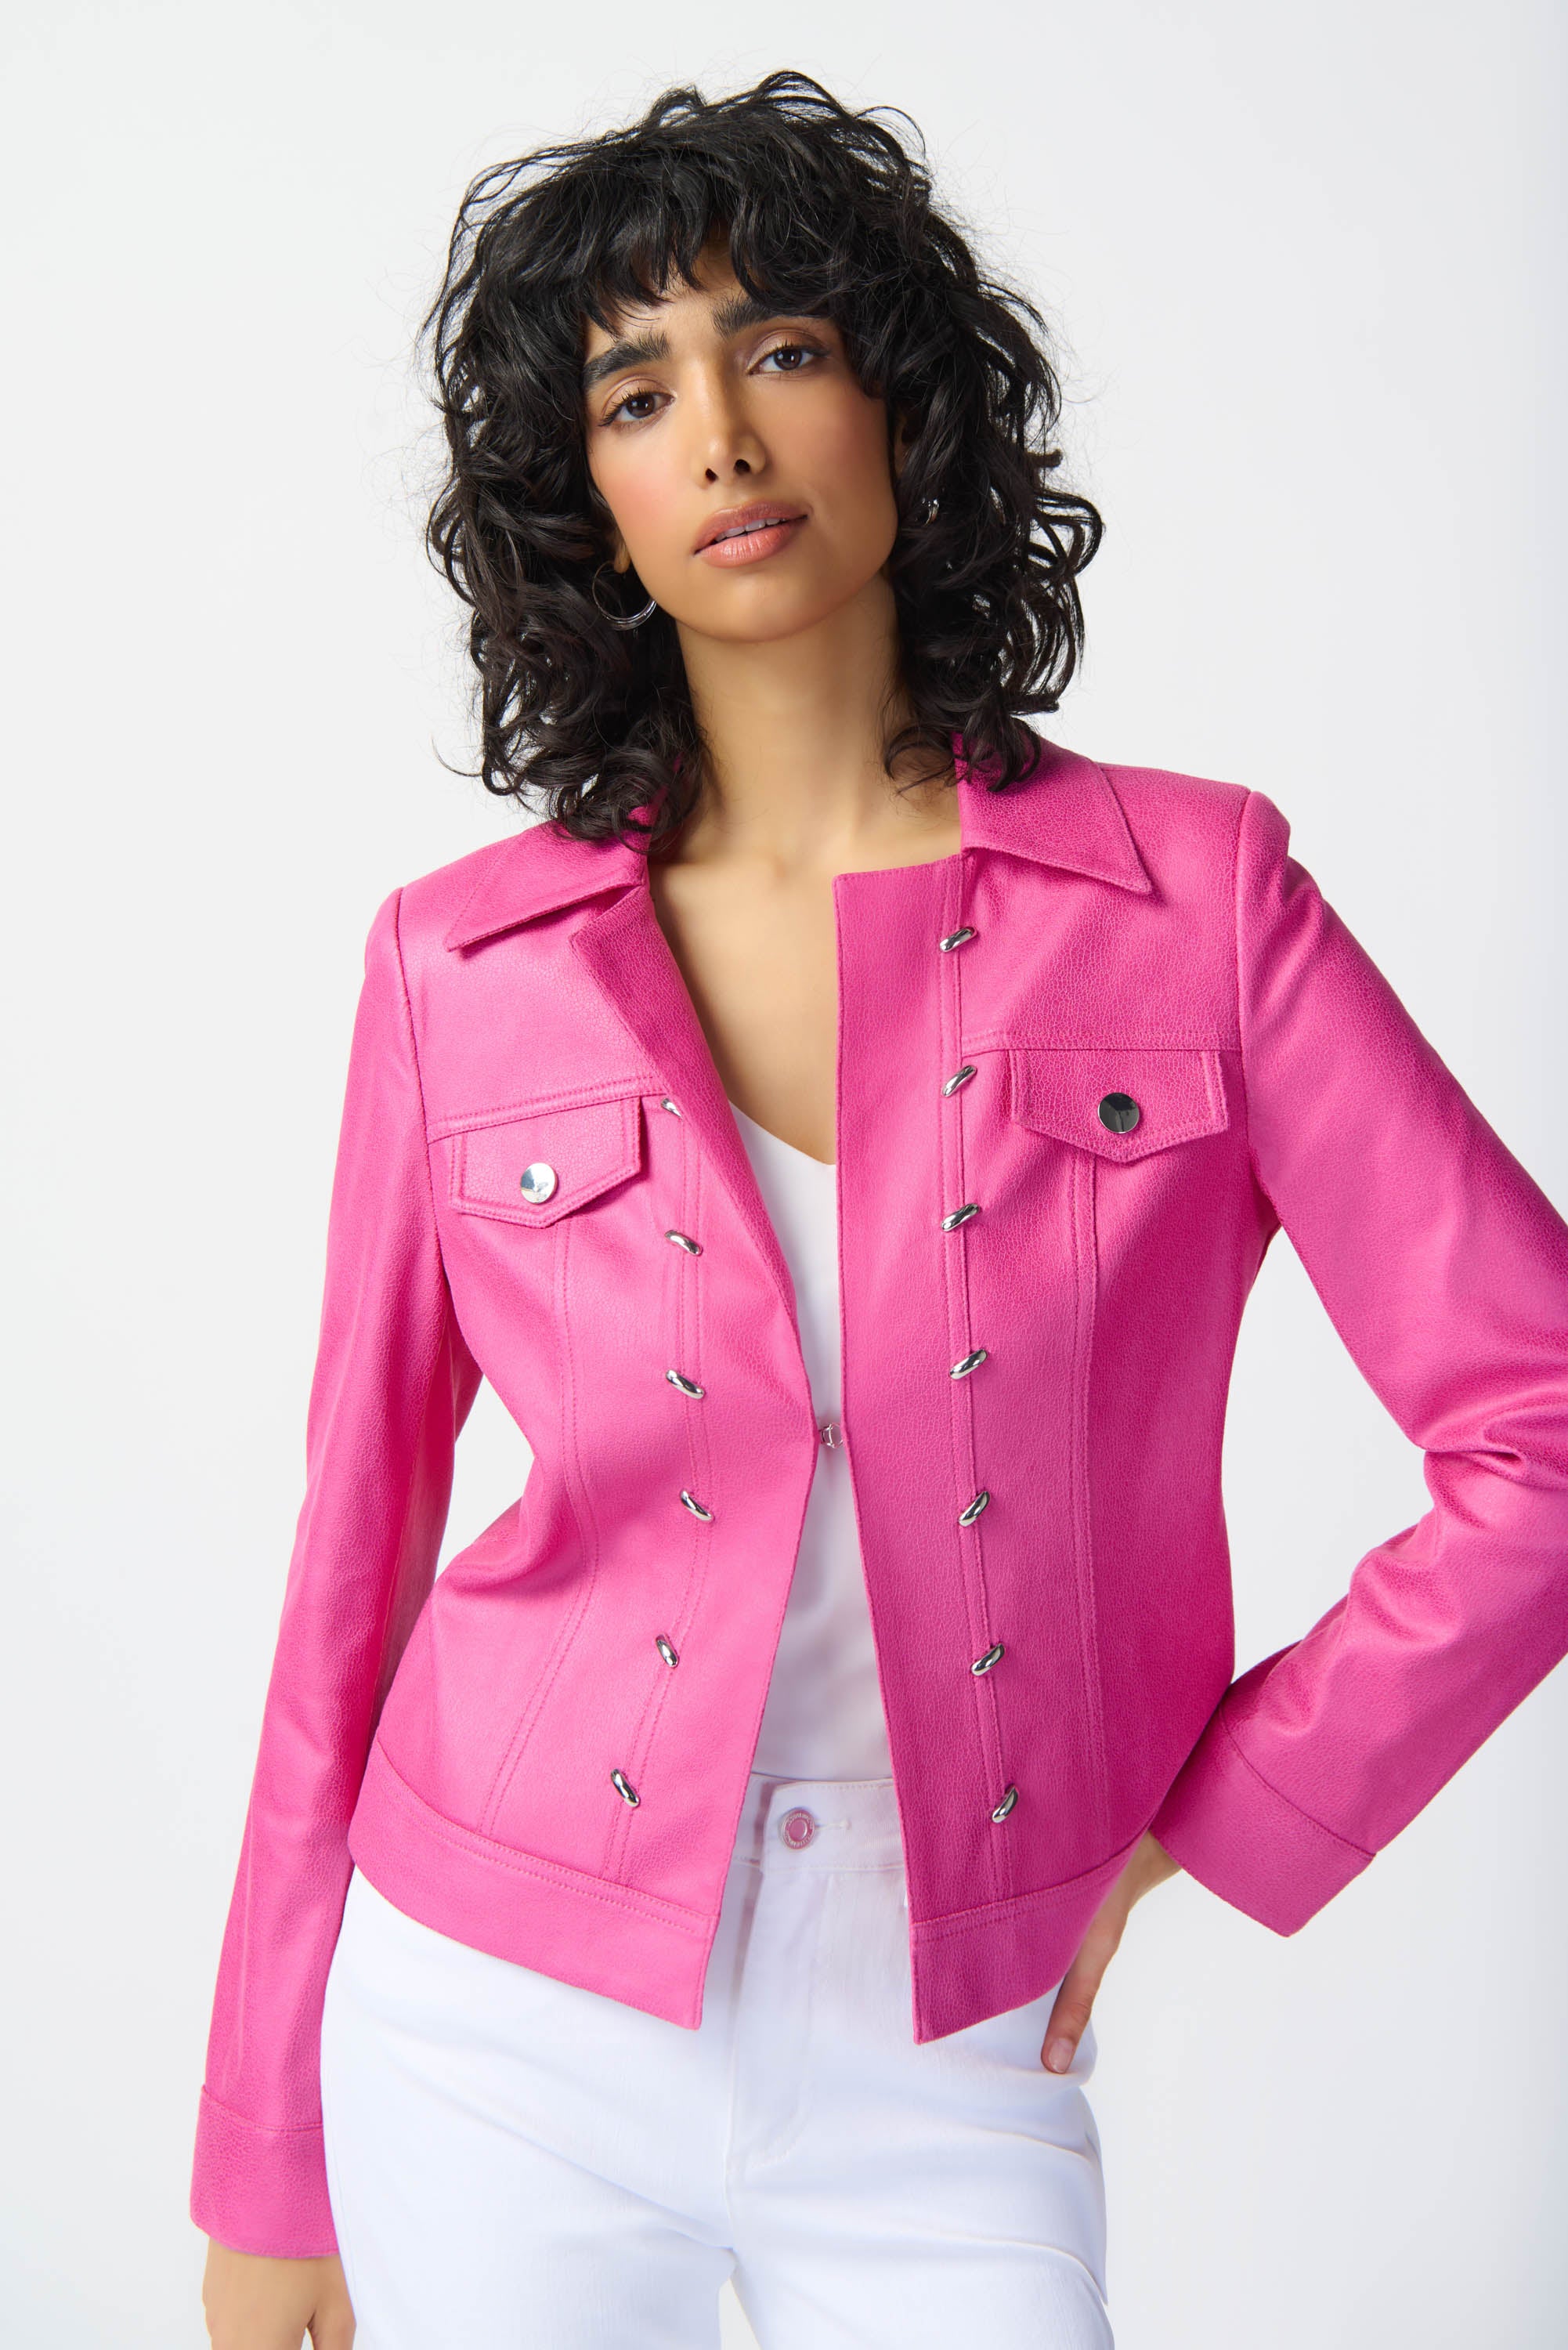 Joseph Ribkoff Foiled Suede Jacket 241911 - Bright Pink